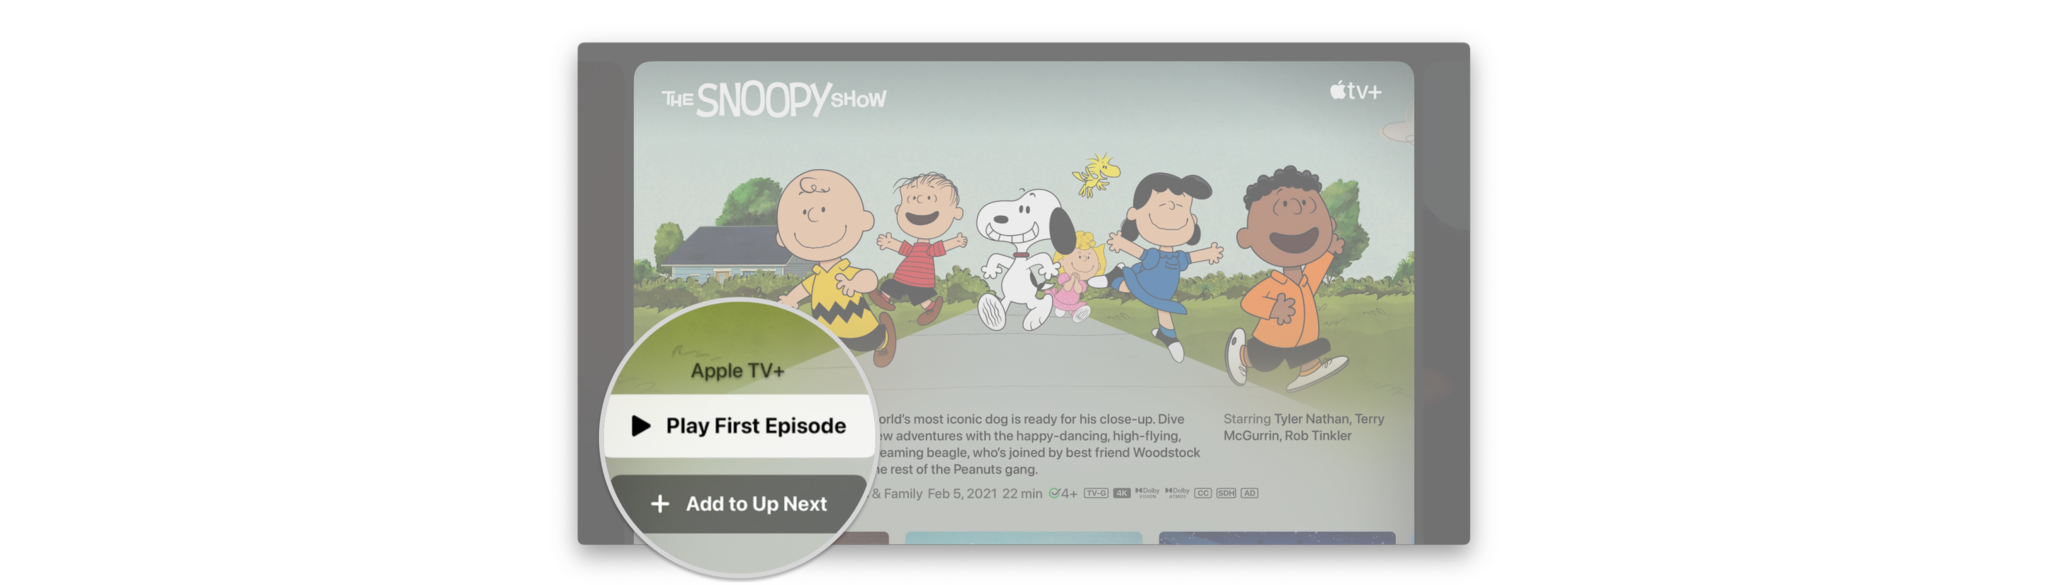 How to watch a show or movie in the Apple TV app on Apple TV by showing steps: Click Play or Play First Episode